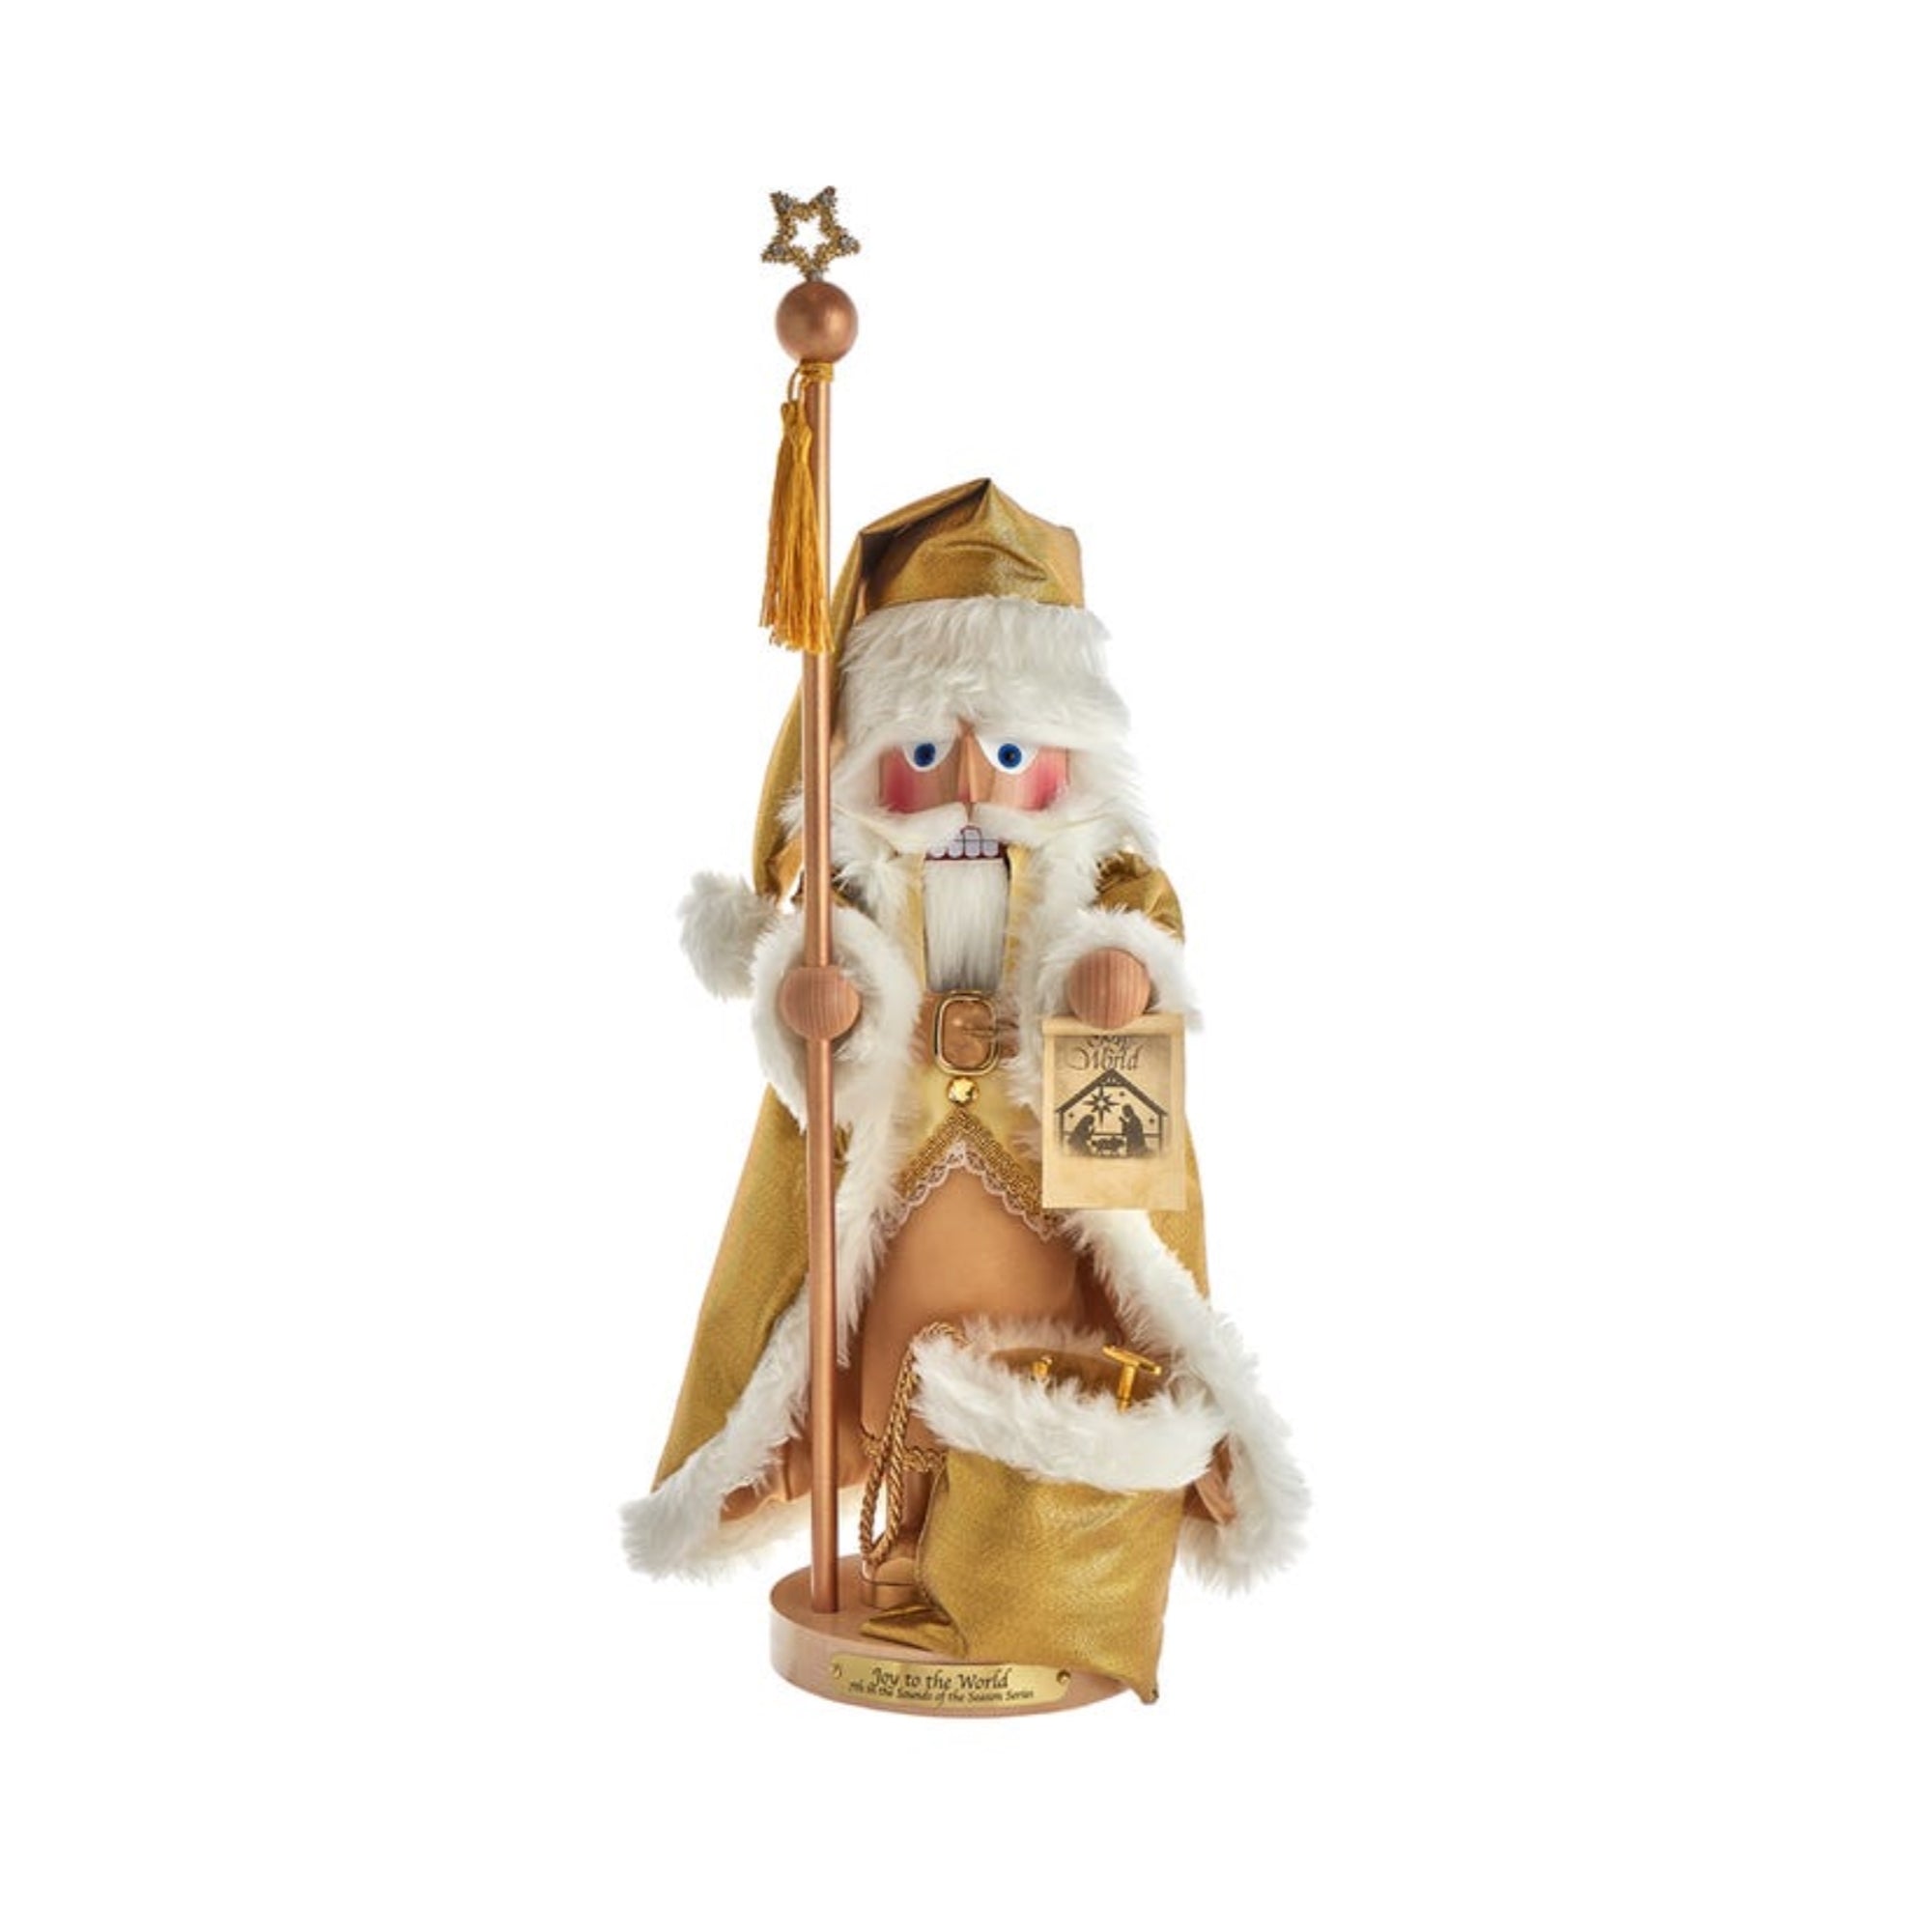 Steinbach Musical Nutcrackers, Song of the Season Series, 7th in the Series, Joy to the World Santa, 18.5"